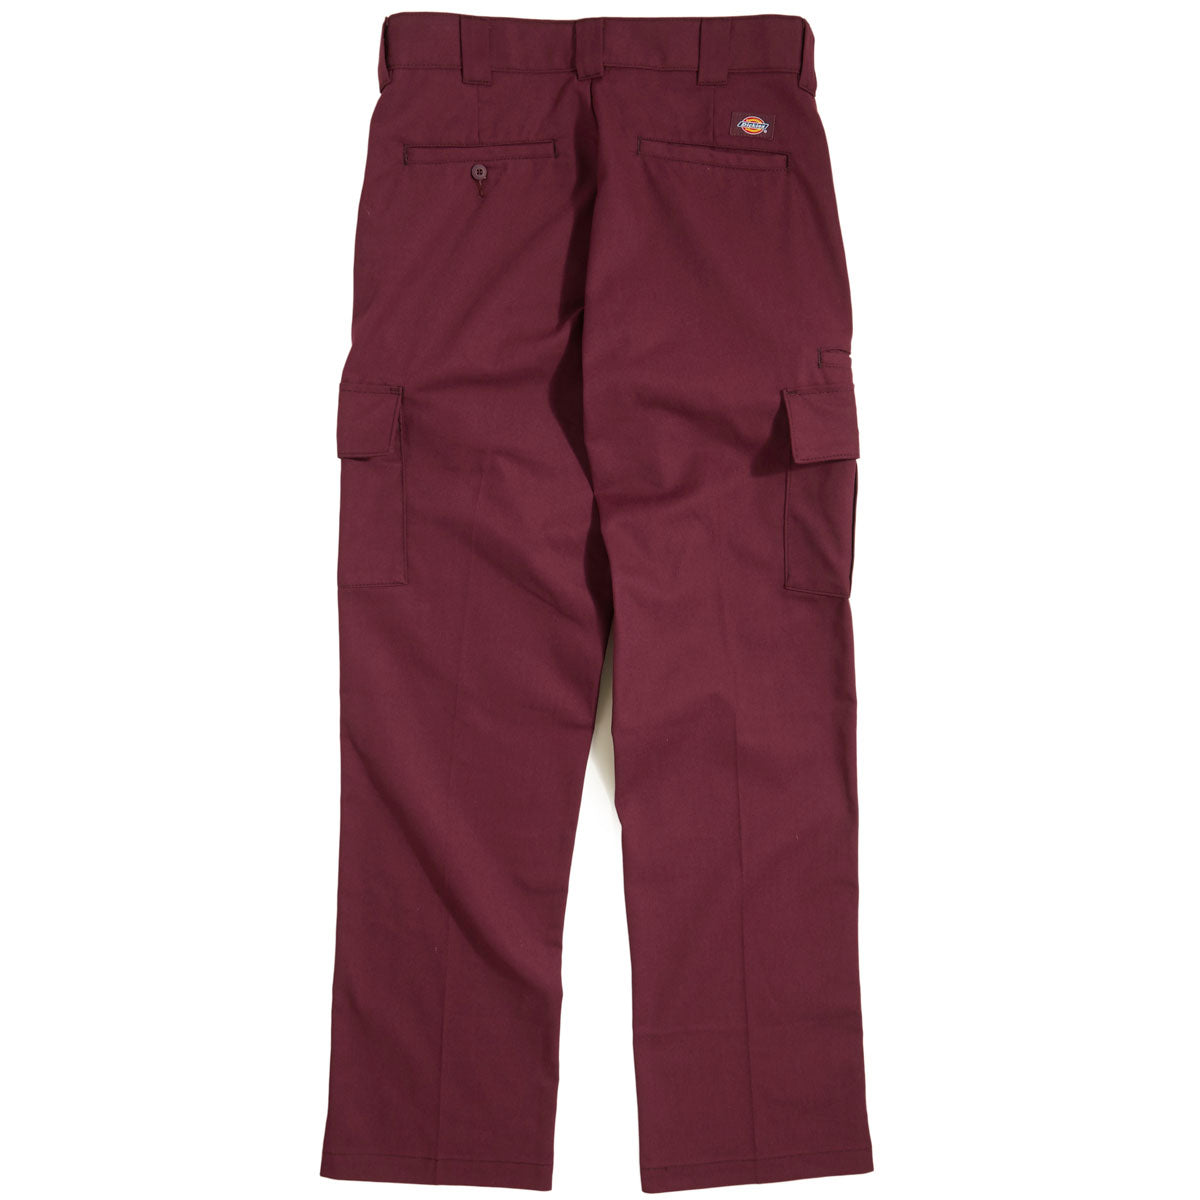 Dickies Regular Fit Contrast Twill Cargo Pants Wine With Dark Contrast Stitch